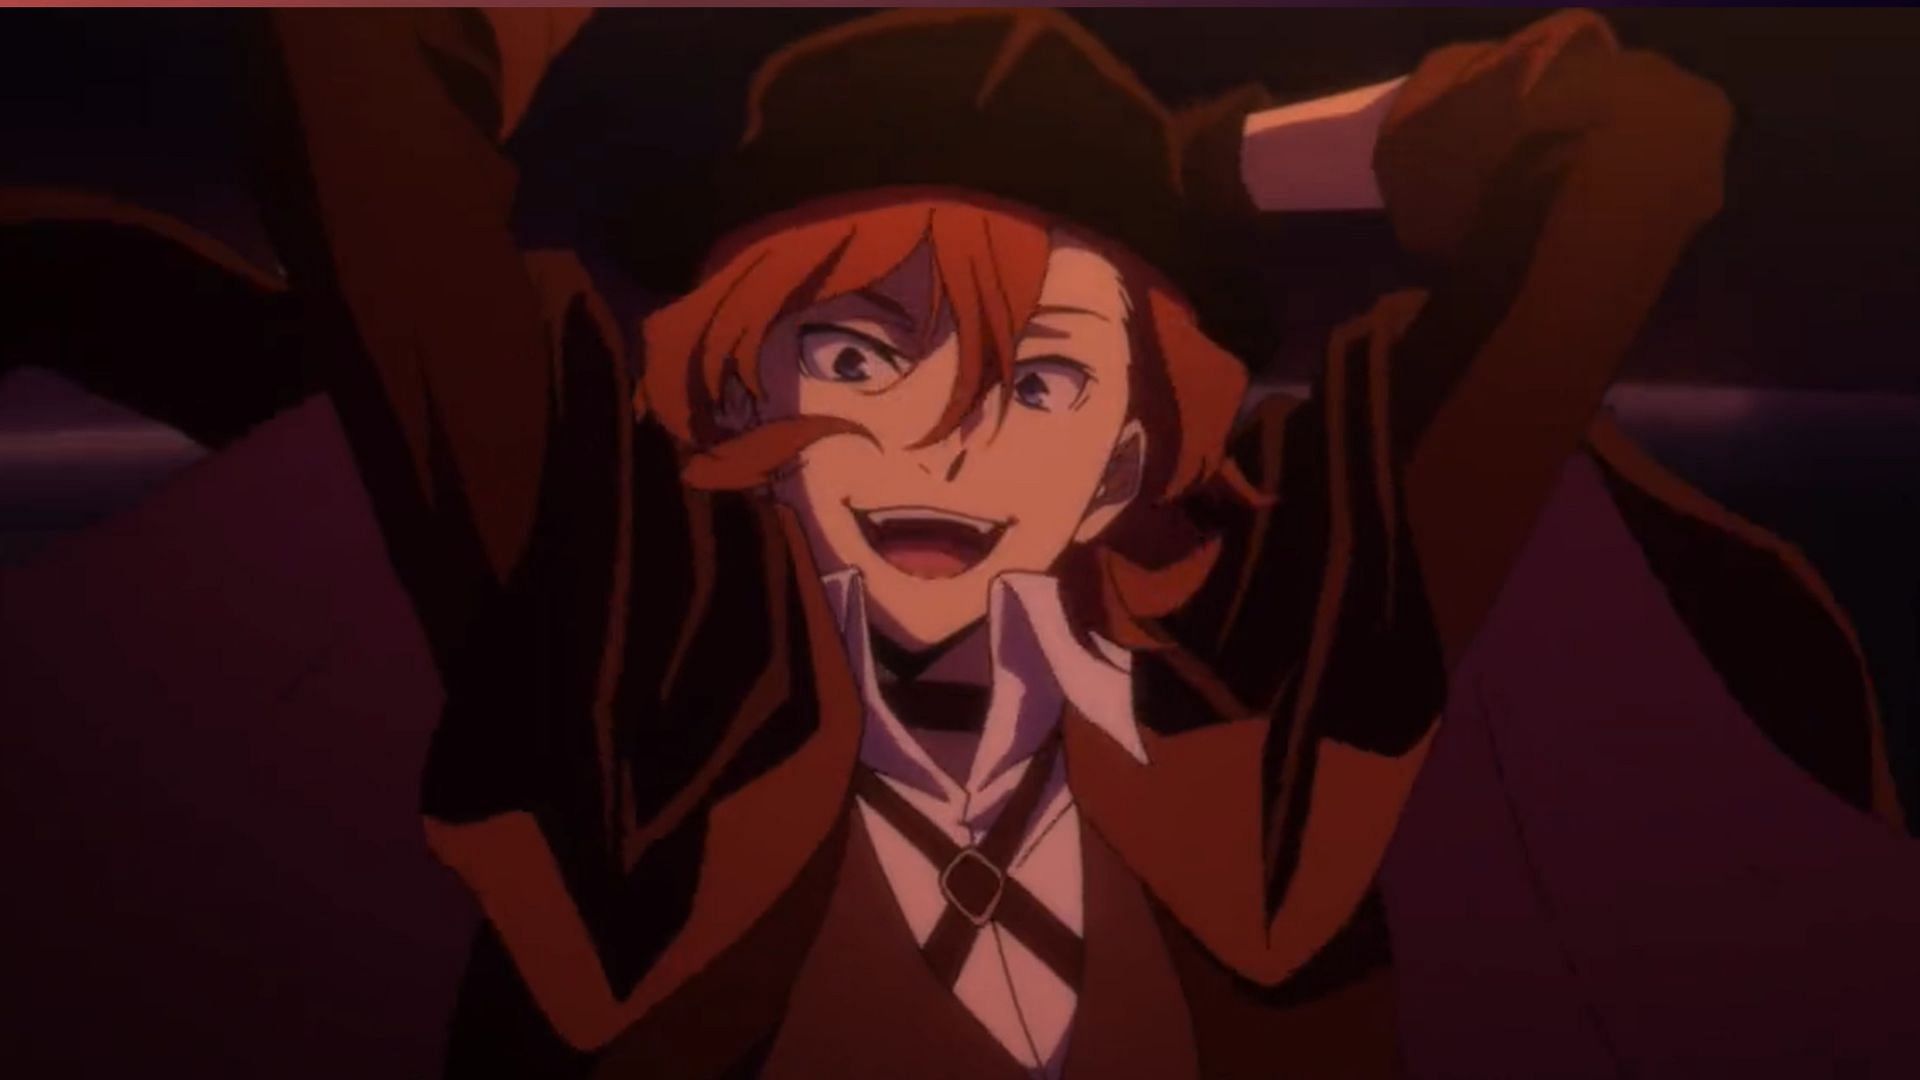 Bungo Stray Dogs Season 5 Episode 7 Review - But Why Tho?